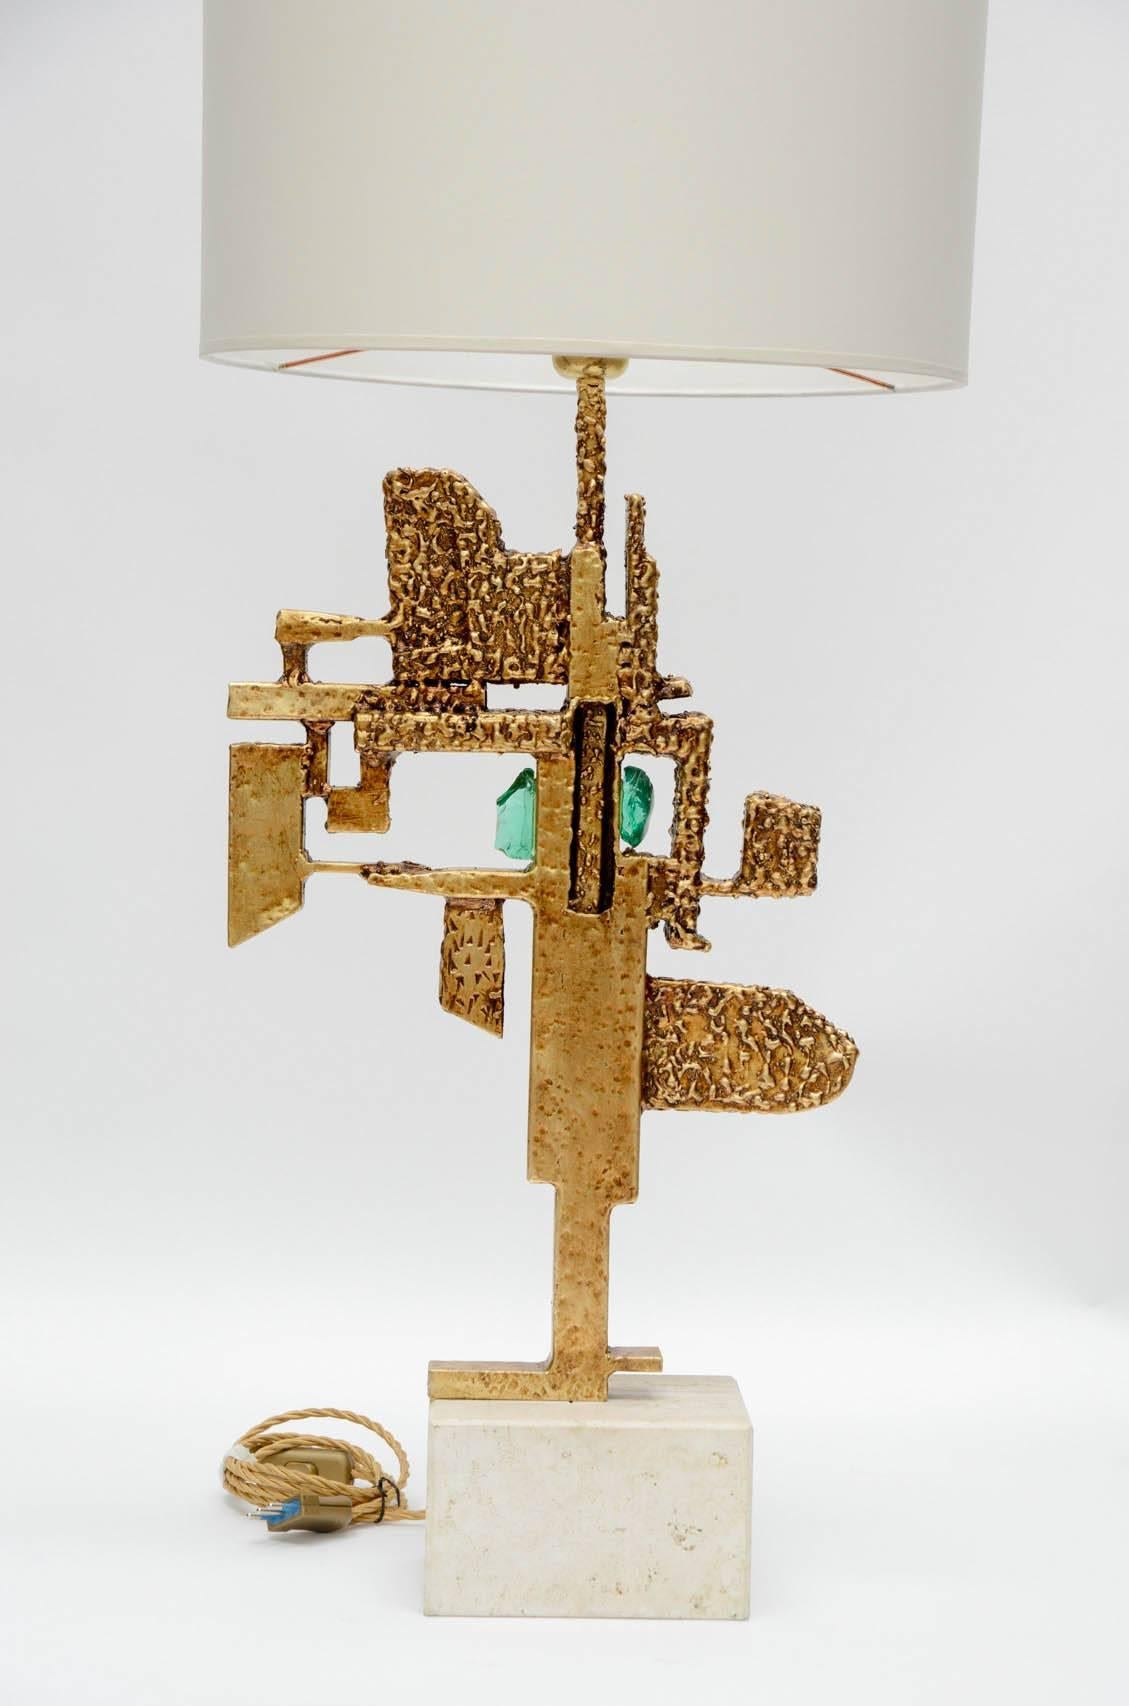 Pair of table lamps made of a travertine rectangle foot and brass composition body with different textures. Finished by Murano glass decorative pieces.